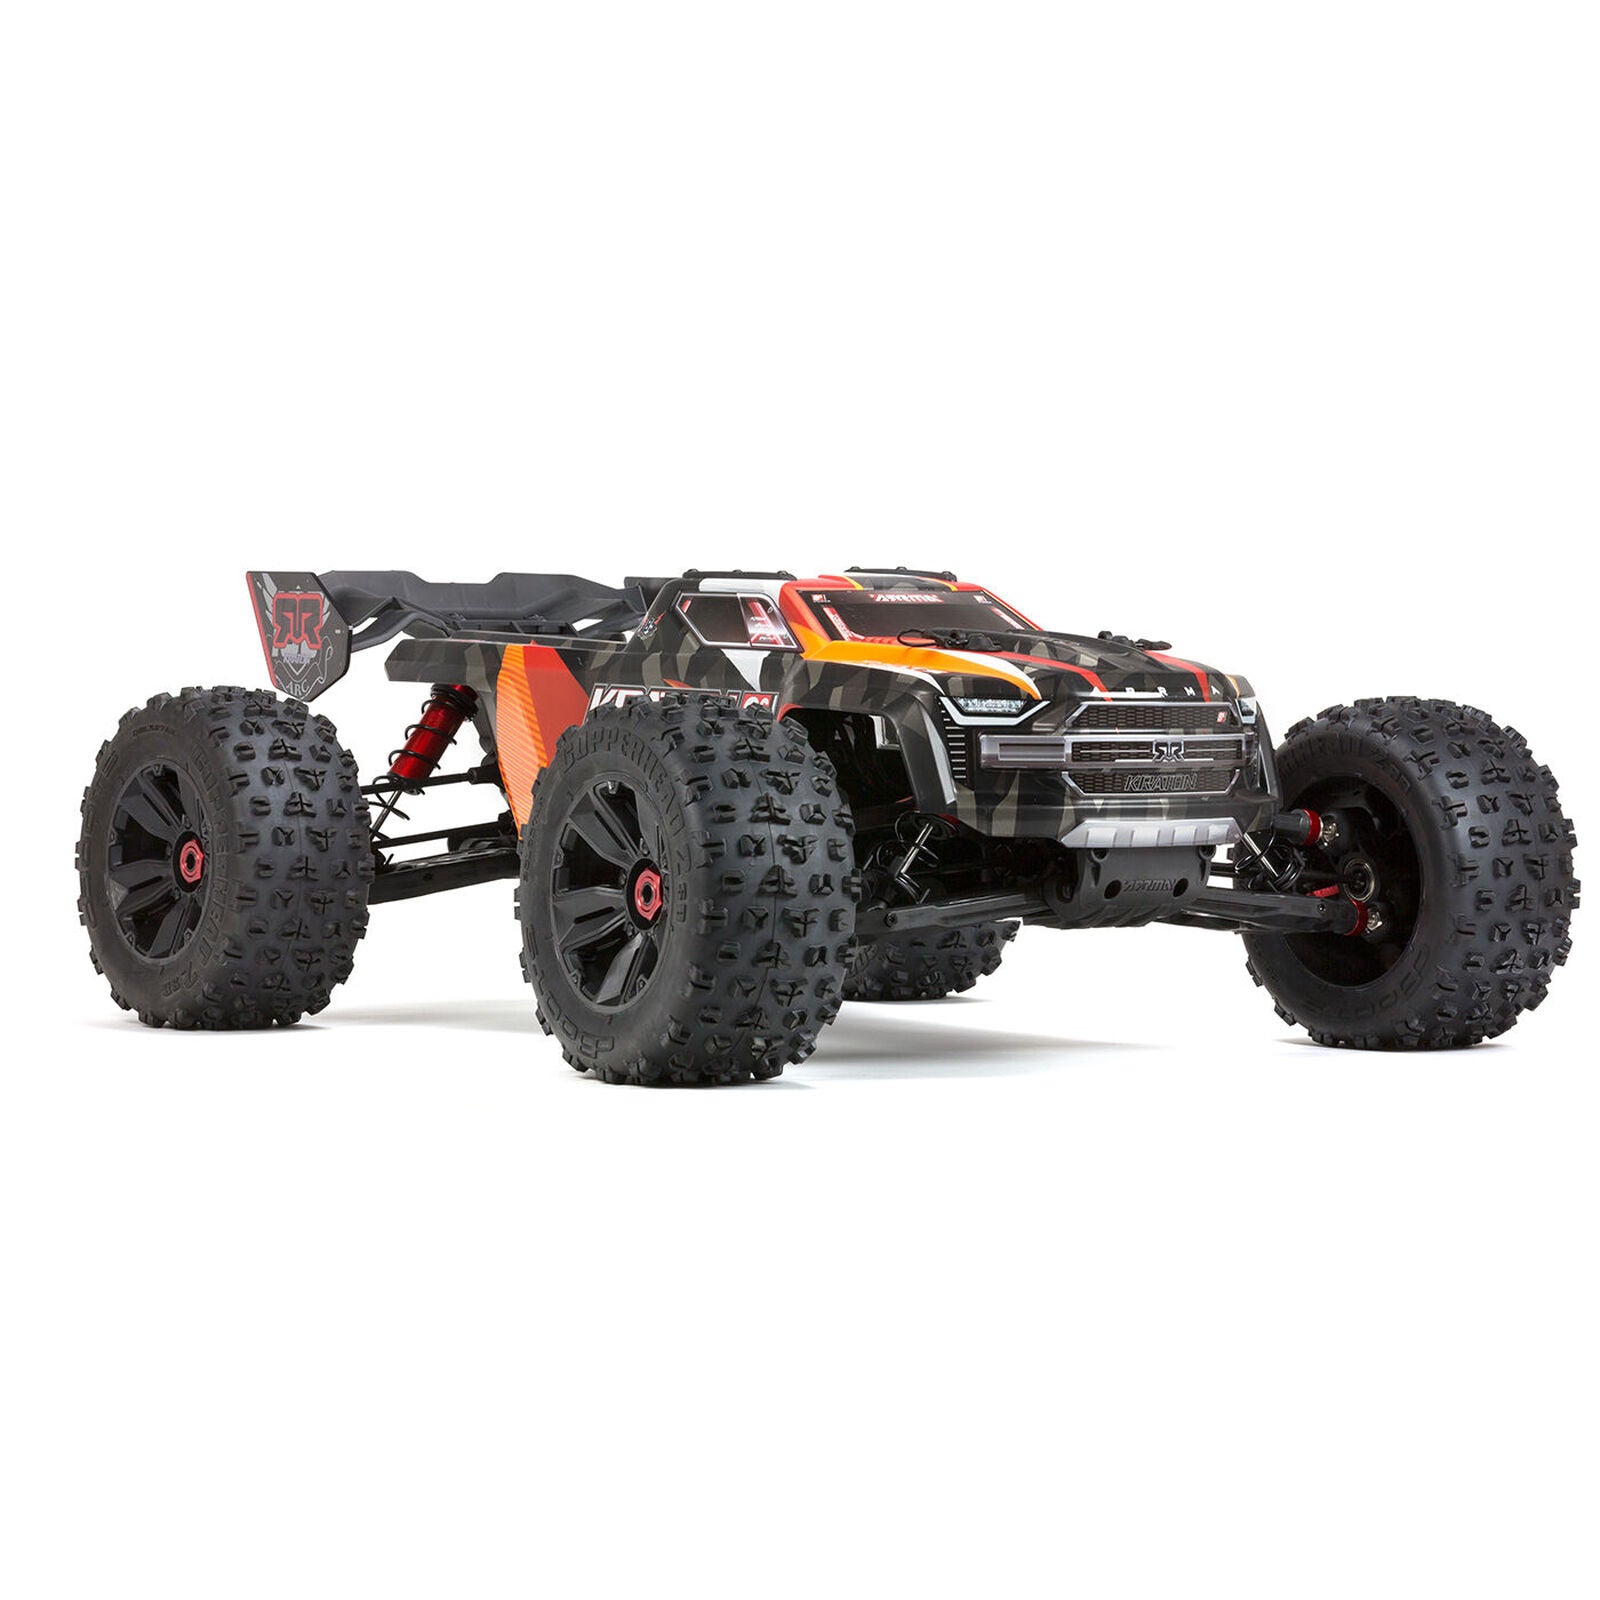 *DISCONTINUED* 1/5 KRATON 4X4 8S BLX Brushless Speed Monster Truck RTR, Orange